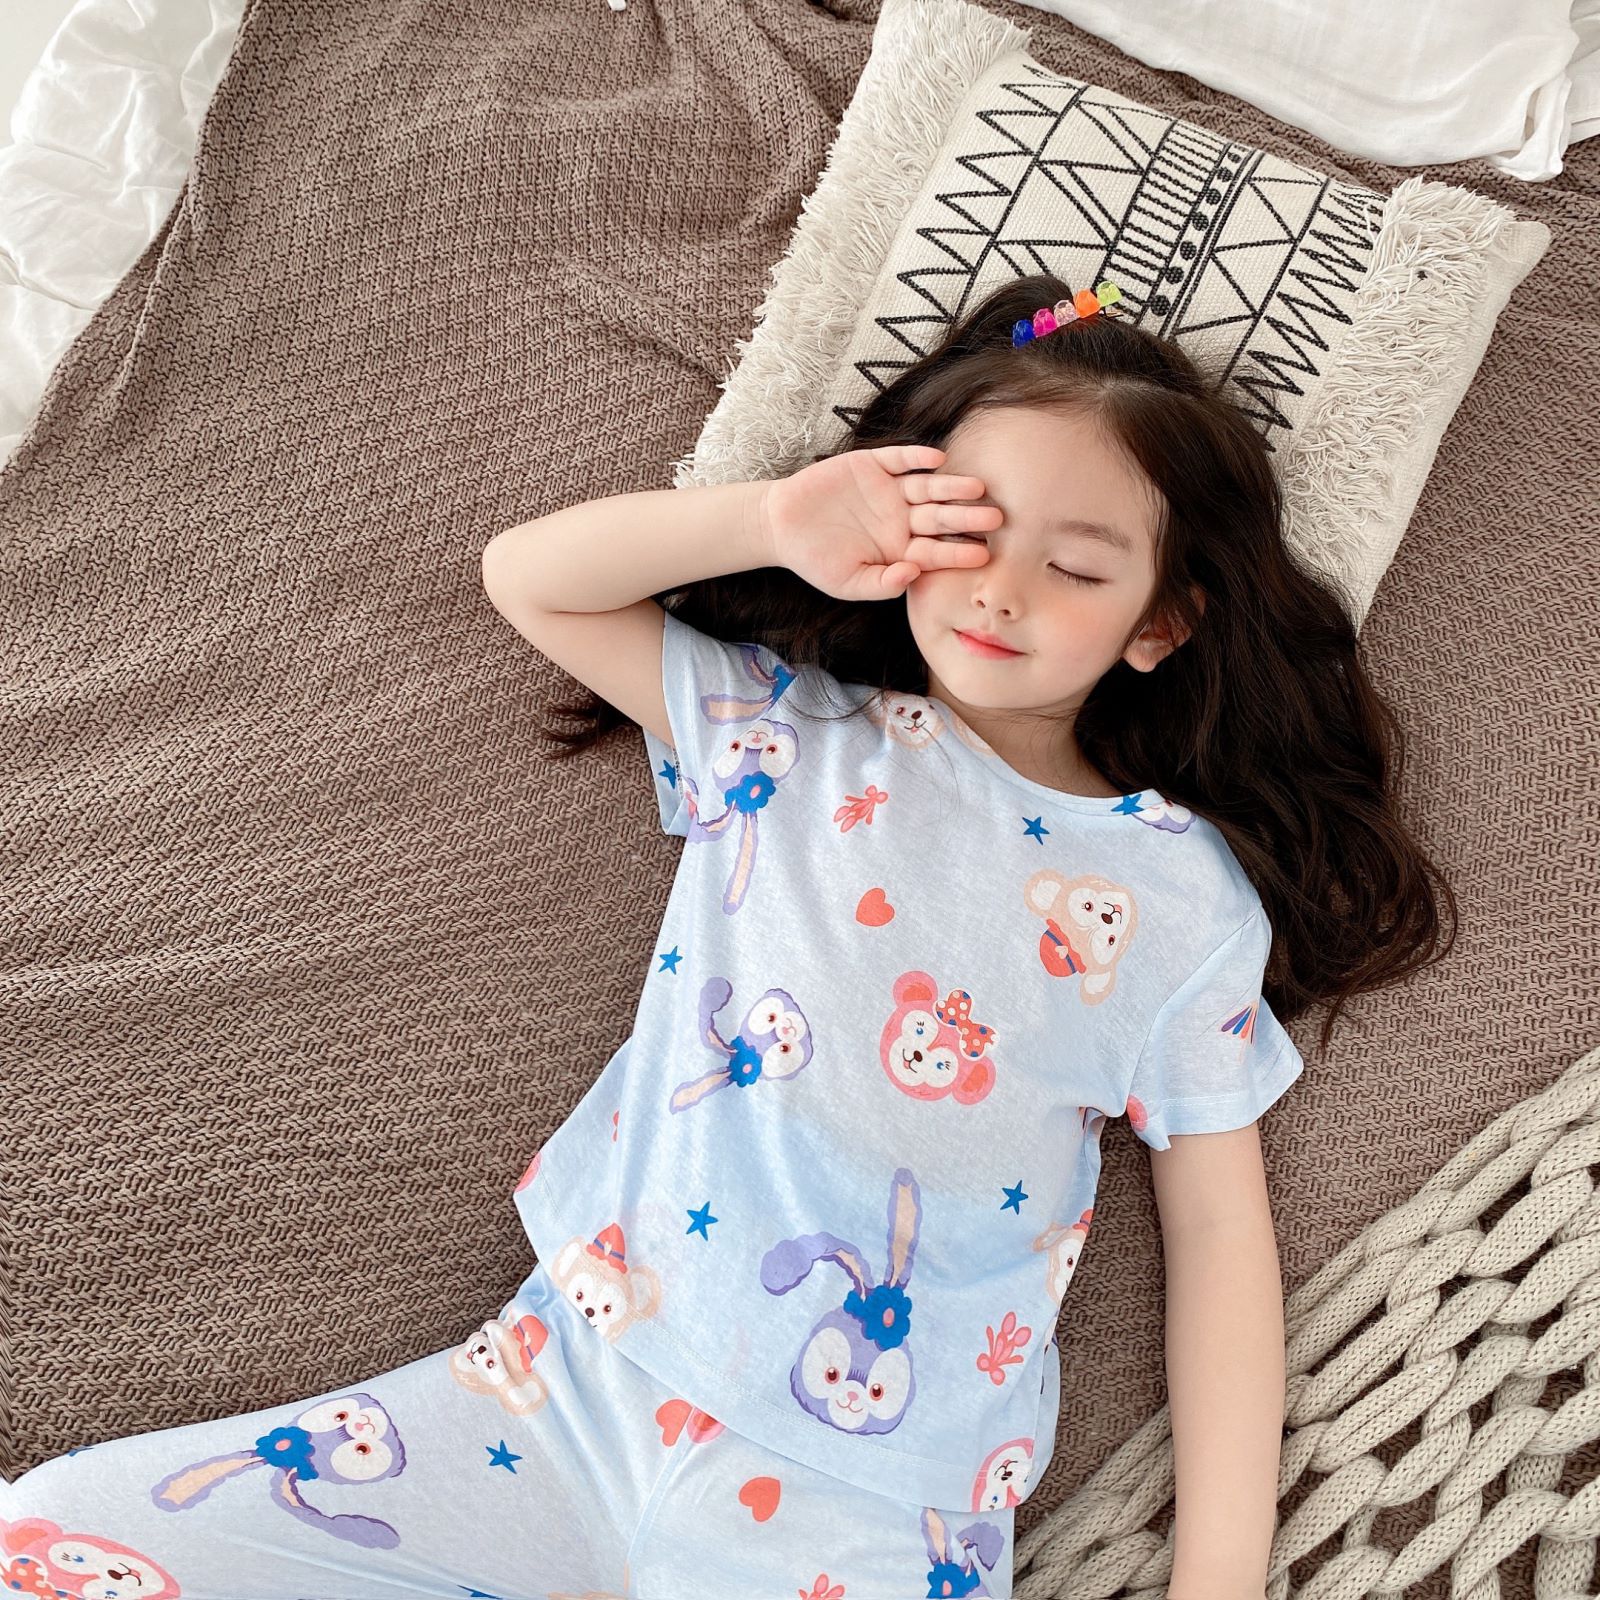 Summer wear new pattern Actress Terreau Home Furnishings pajamas girl Air conditioning service suit Snow Cotton Mosquito control